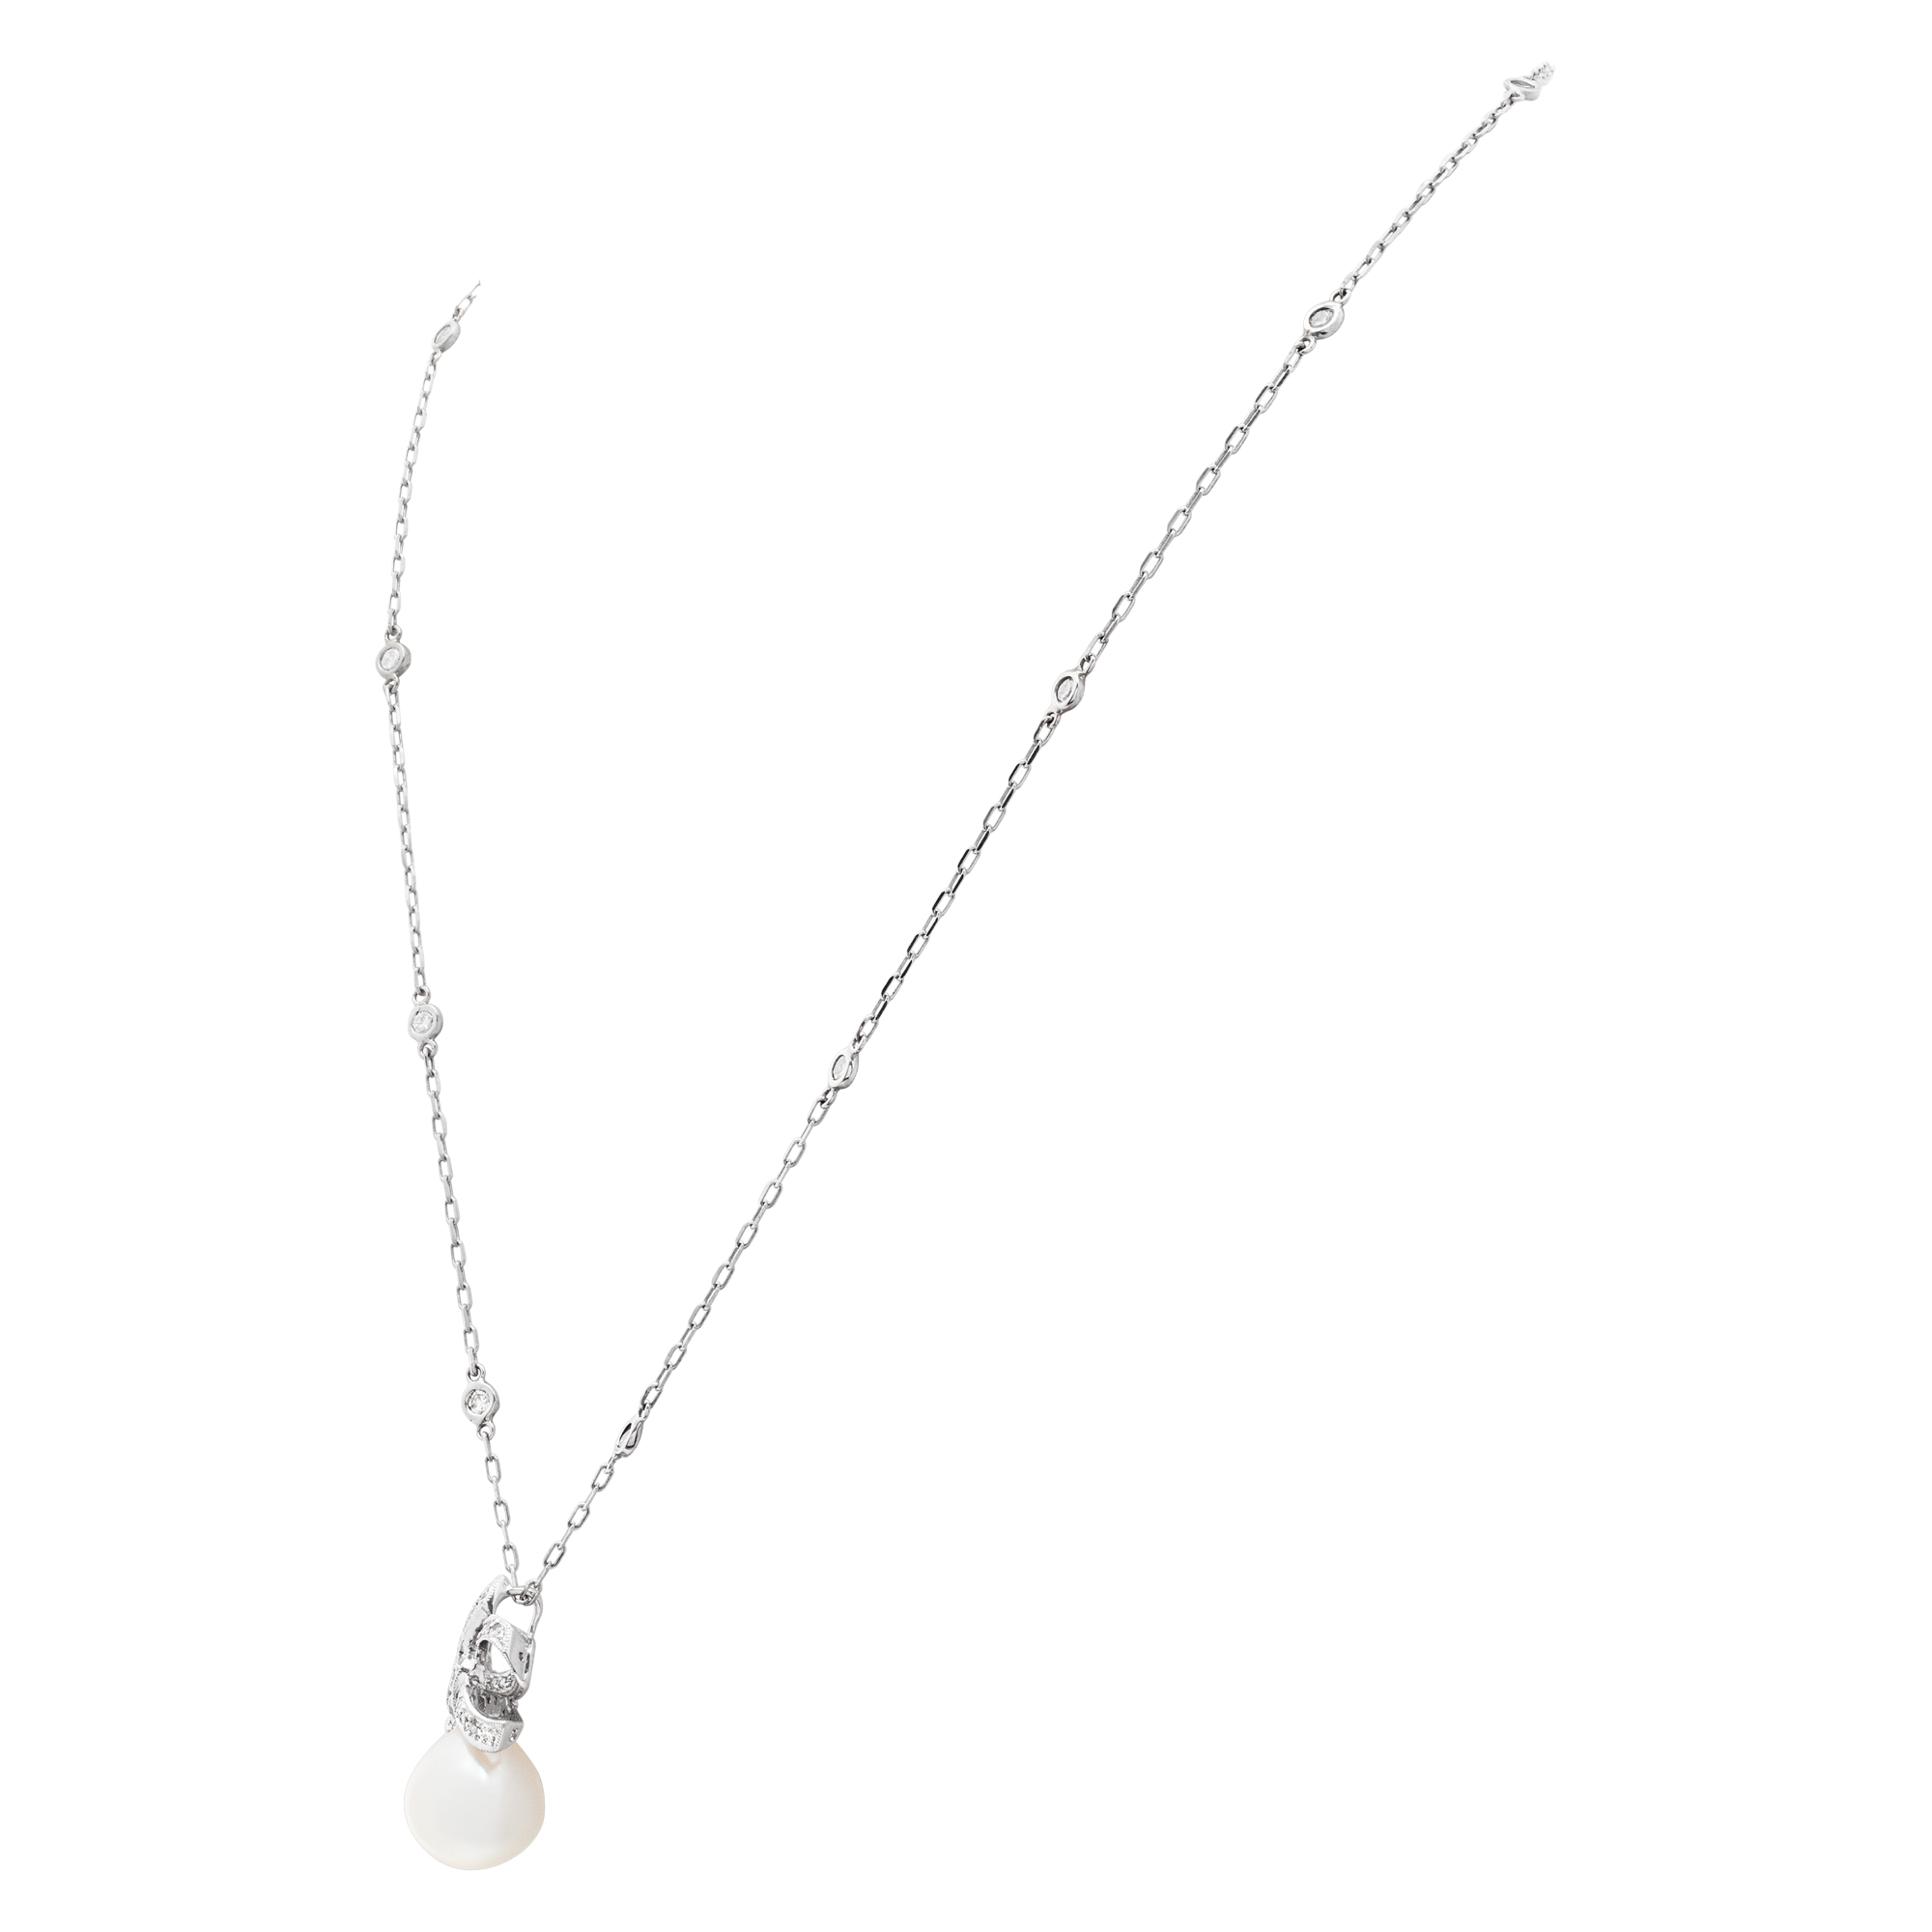 Fresh water pearl (12 x 12.5mm) and diamond pendant in 18k white gold with 14k white gold diamonds by the yard chain image 4